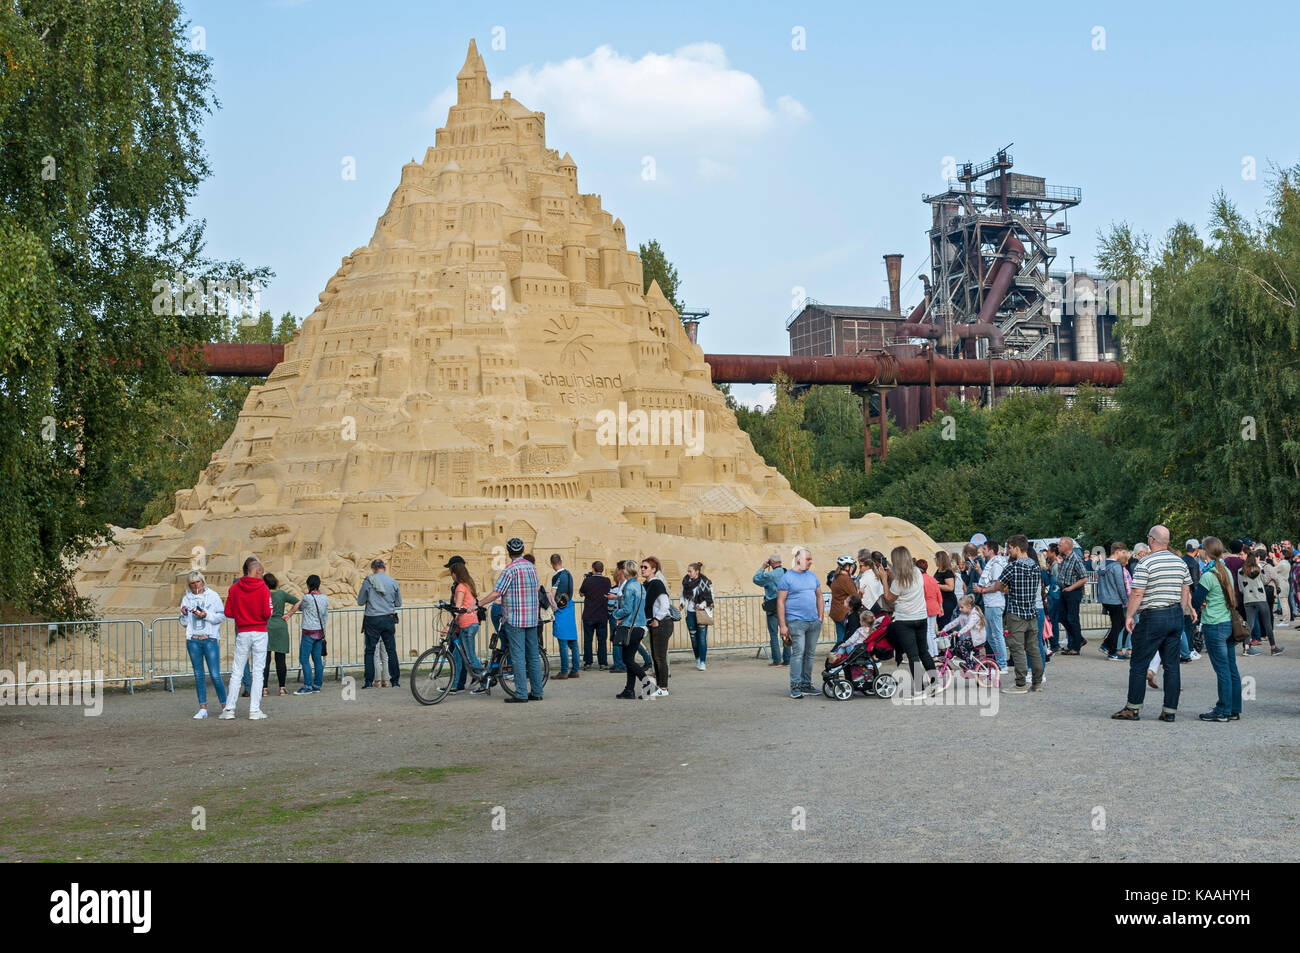 Record breaking sand castle which gained an entry in the Guiness Book of Records in Landschafts Park Duisburg Nord, Germany, 2017, Stock Photo